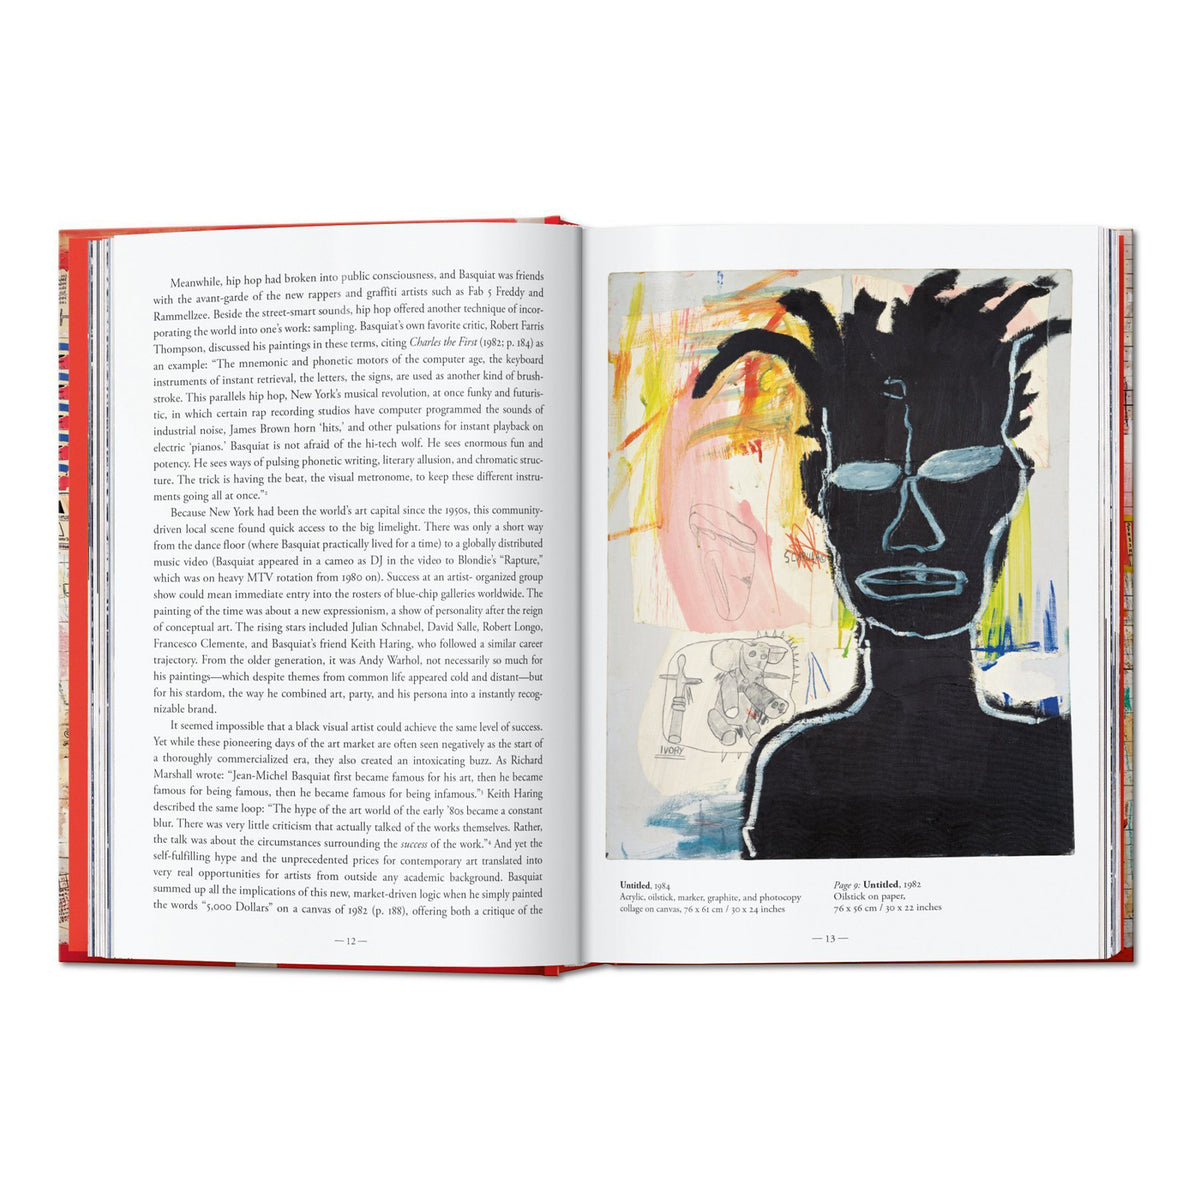 Jean-Michel Basquiat&#39;s text and illustration pages.